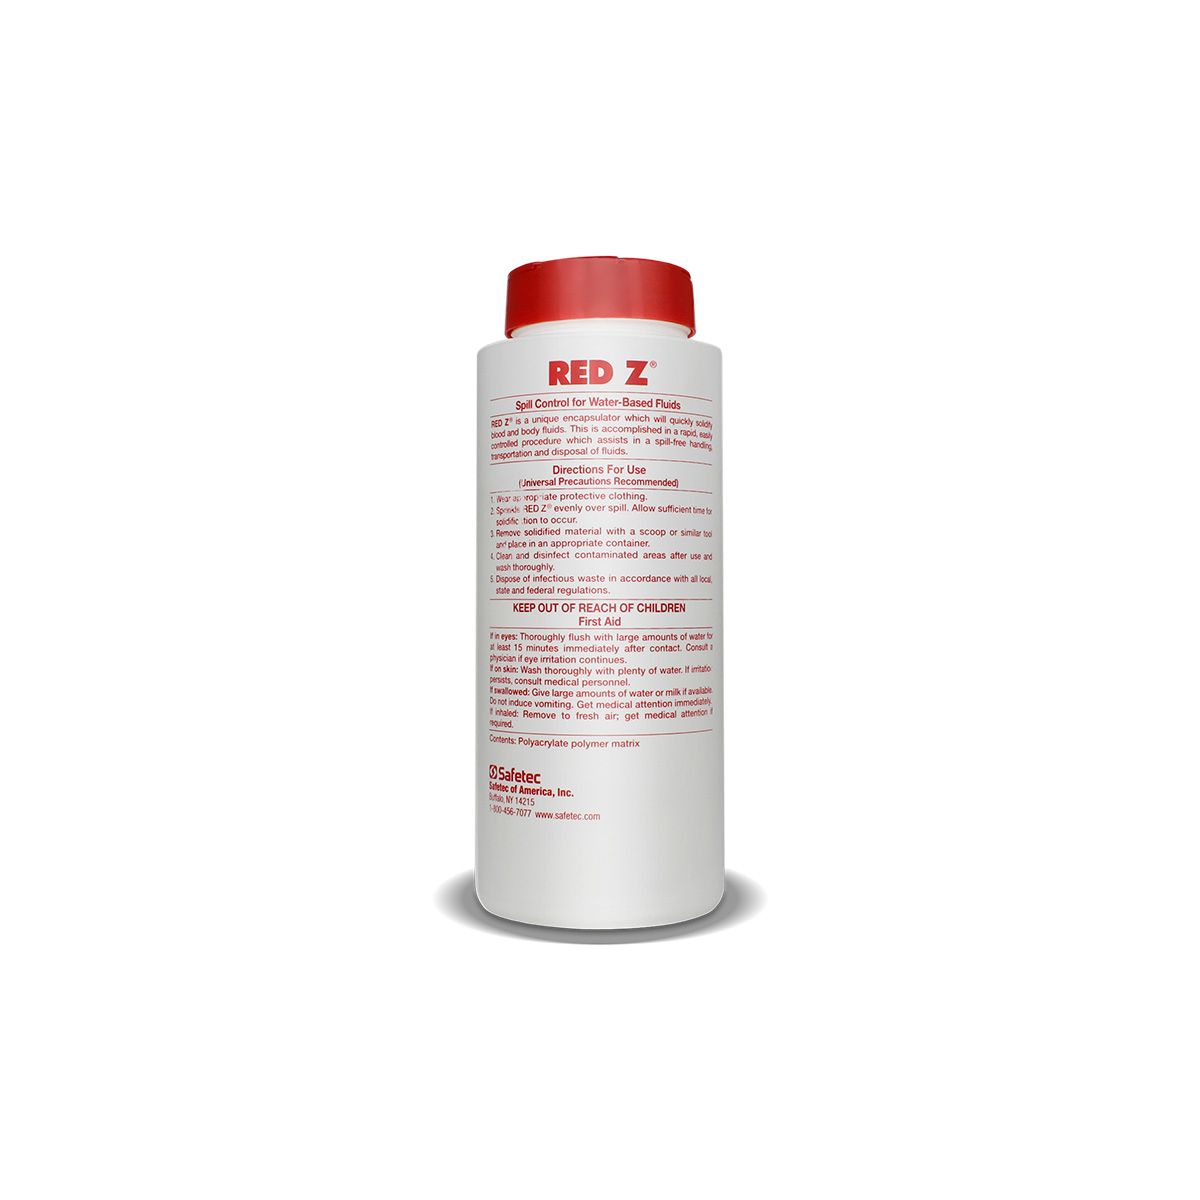 Red Z® Spill Control Solidifier Shaker Top - Infection and Spill Control